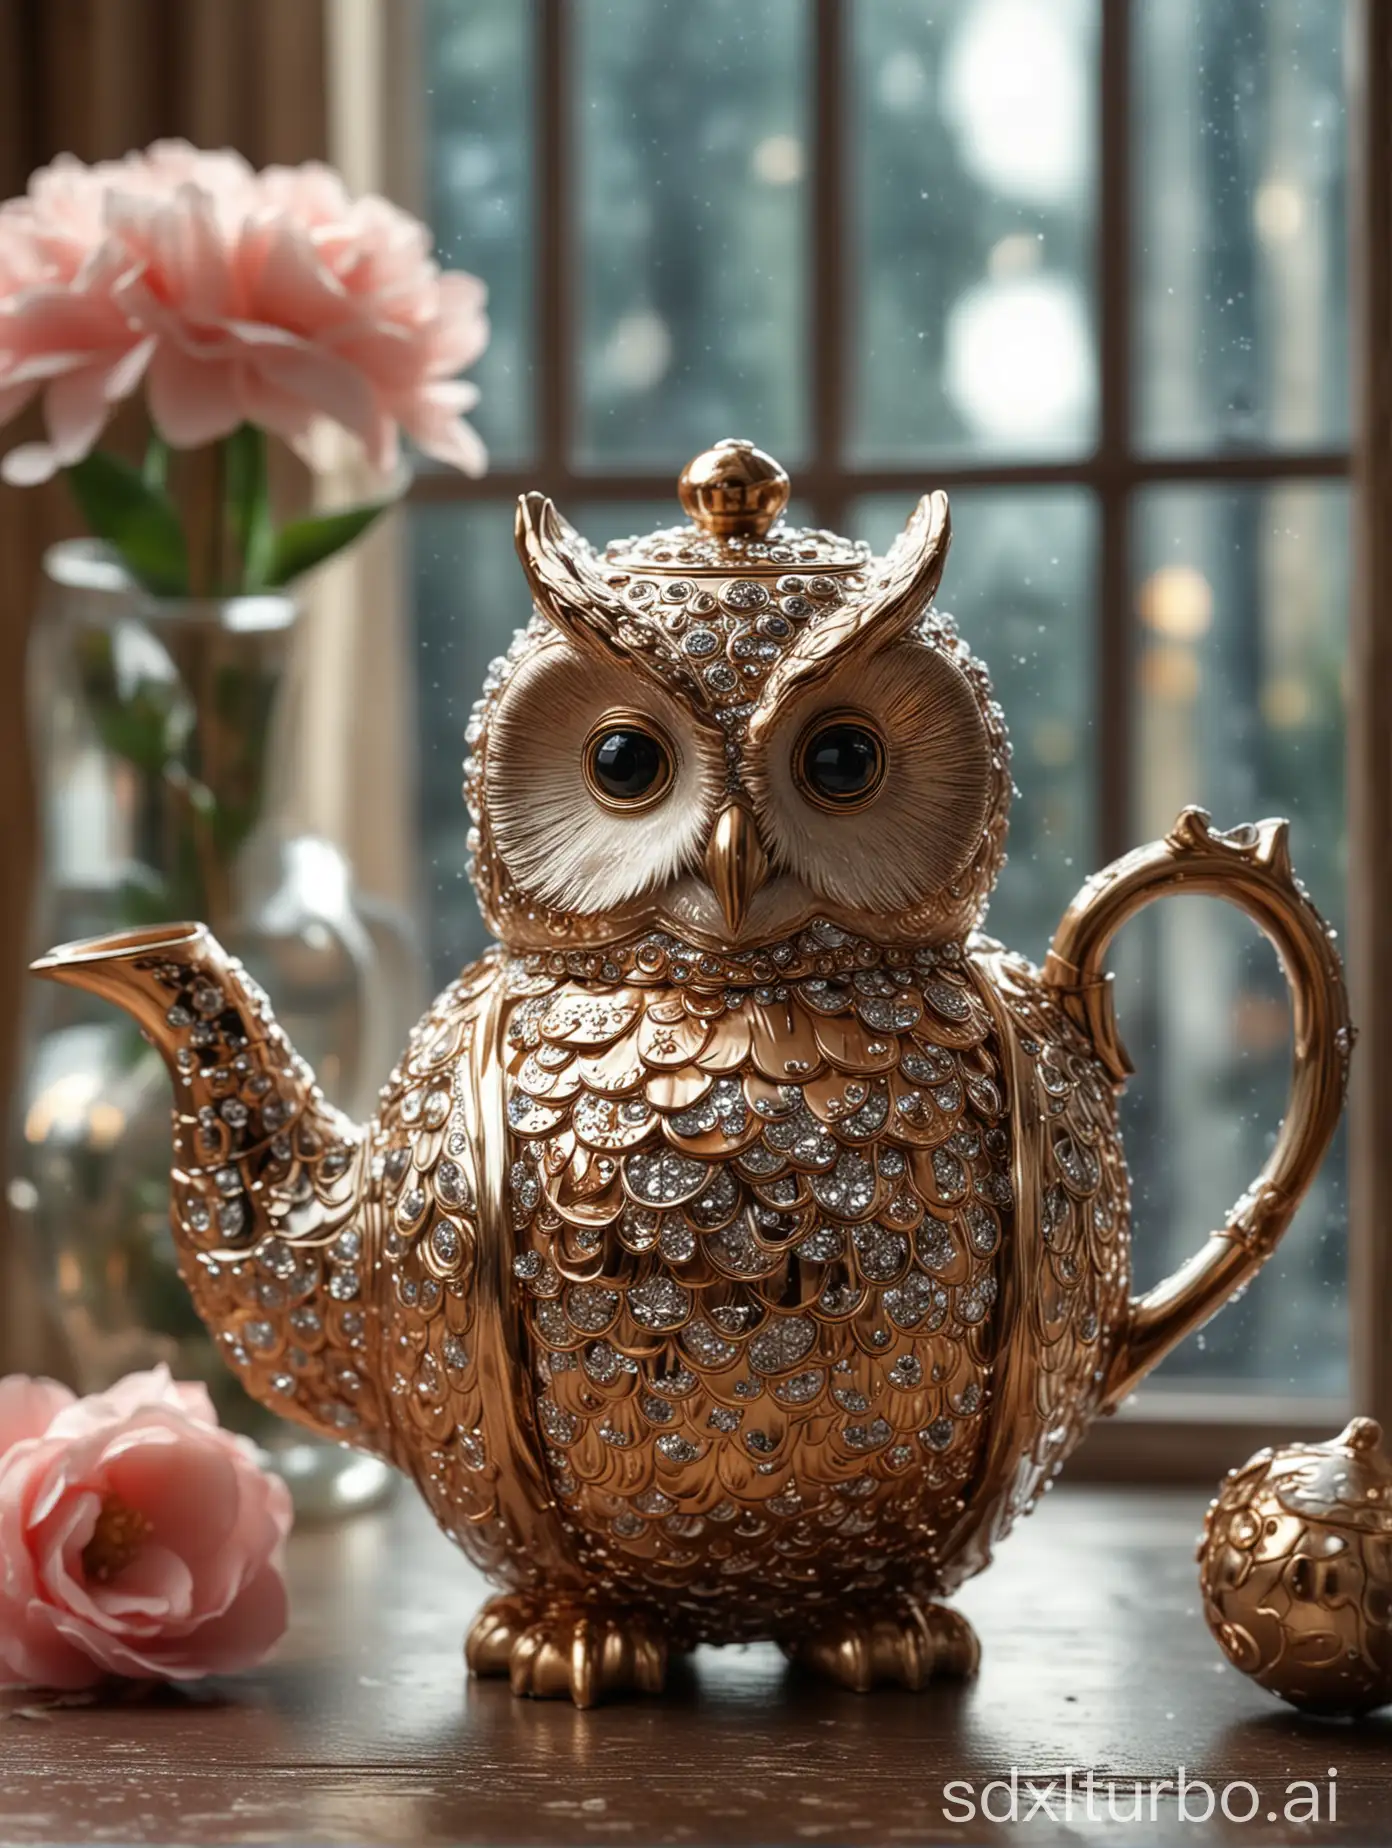 Exquisite-Owl-Teapot-Surrounded-by-Camellias-and-Glittering-Ornaments